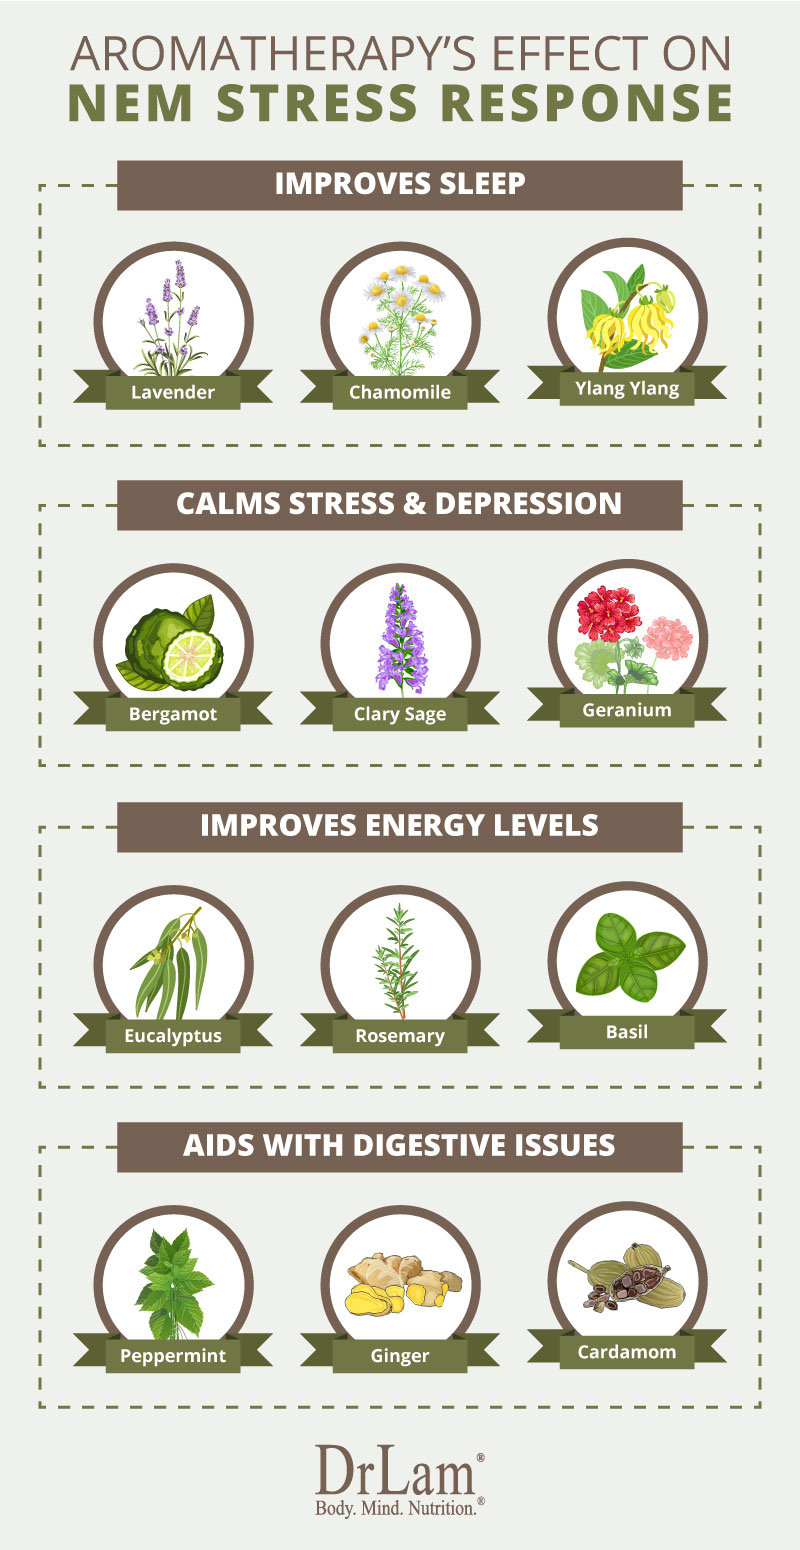 Check out this easy to understand infographic about aromatherapy benefits for NEM stress response